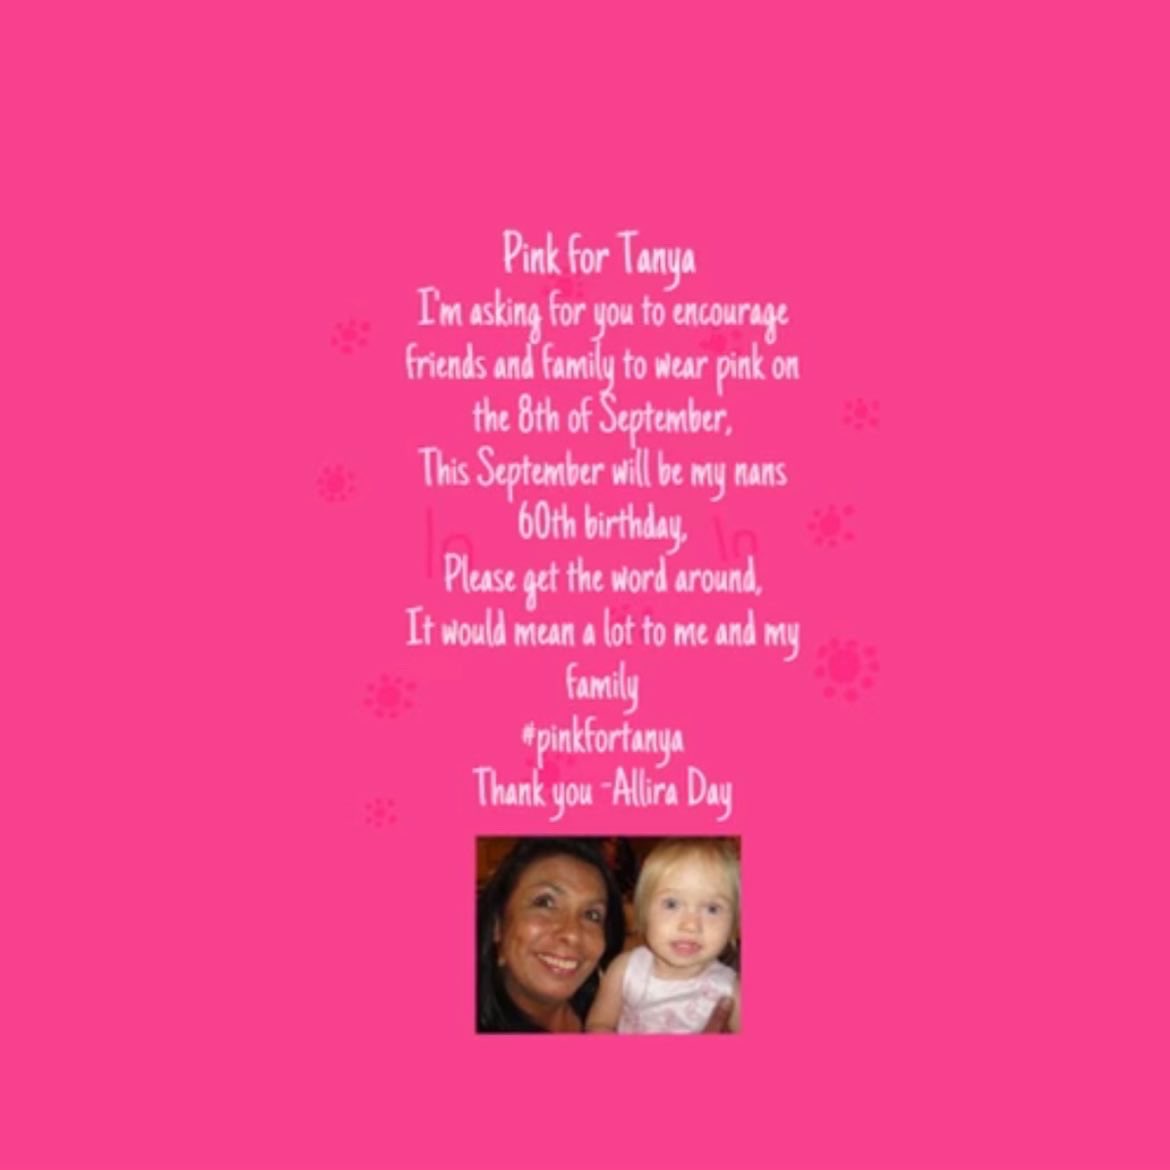 Another year, another birthday without you 💖 This would of been her 60th. You know the drill, let’s get behind honouring mums legacy with #PinkForTanya. Request and tiles by my deadly niece Allira Day